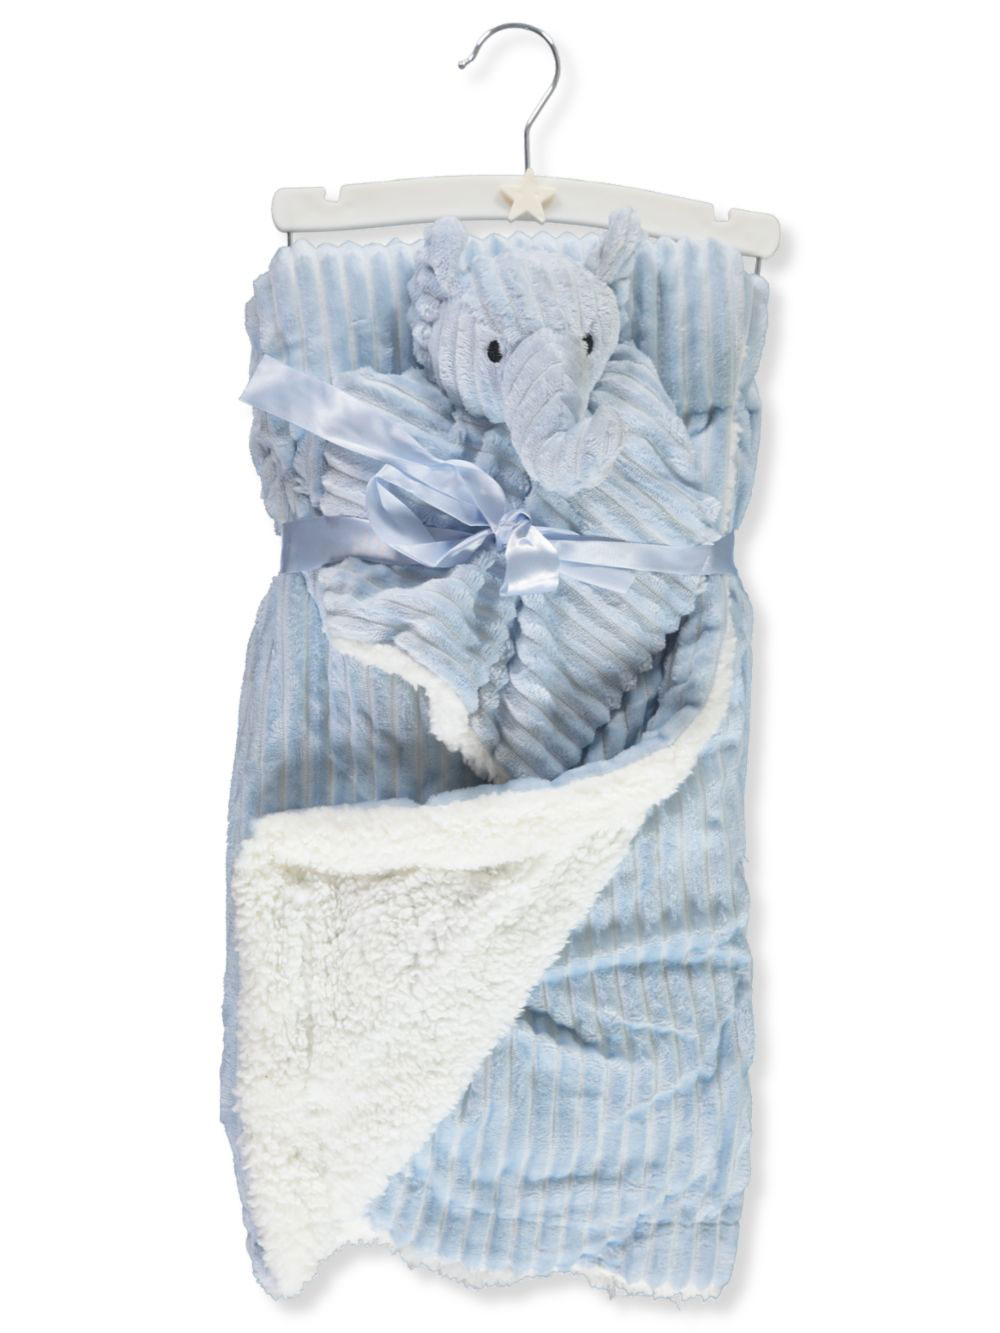 Lullaby Kids Blankets